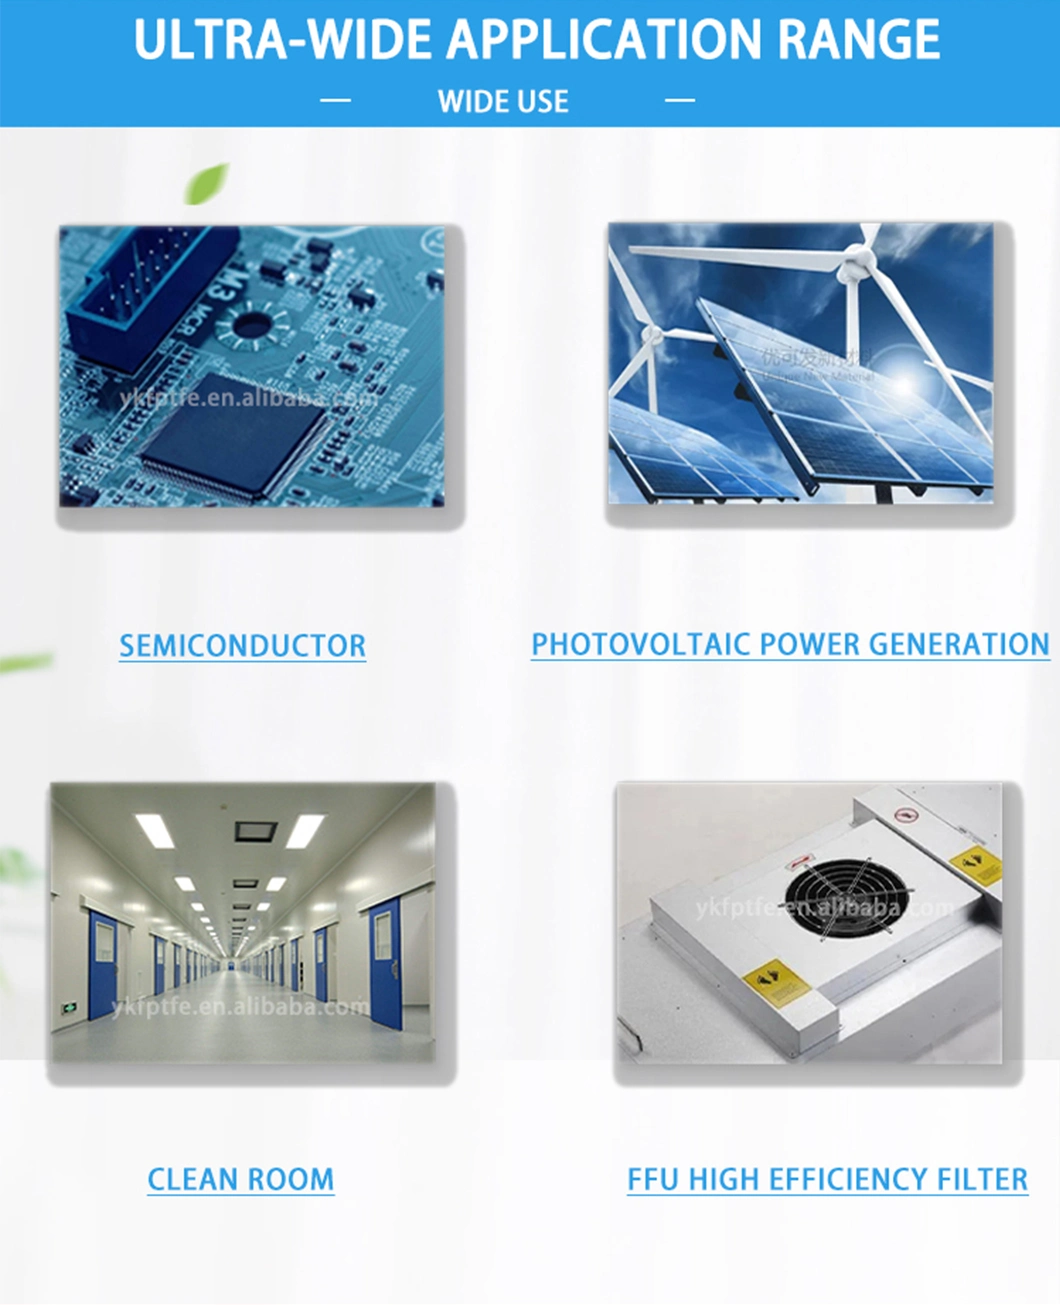 UNM Ash ePTFE Air Filtration Film Fully Meet the Precision Electronic Products Processing and Purification